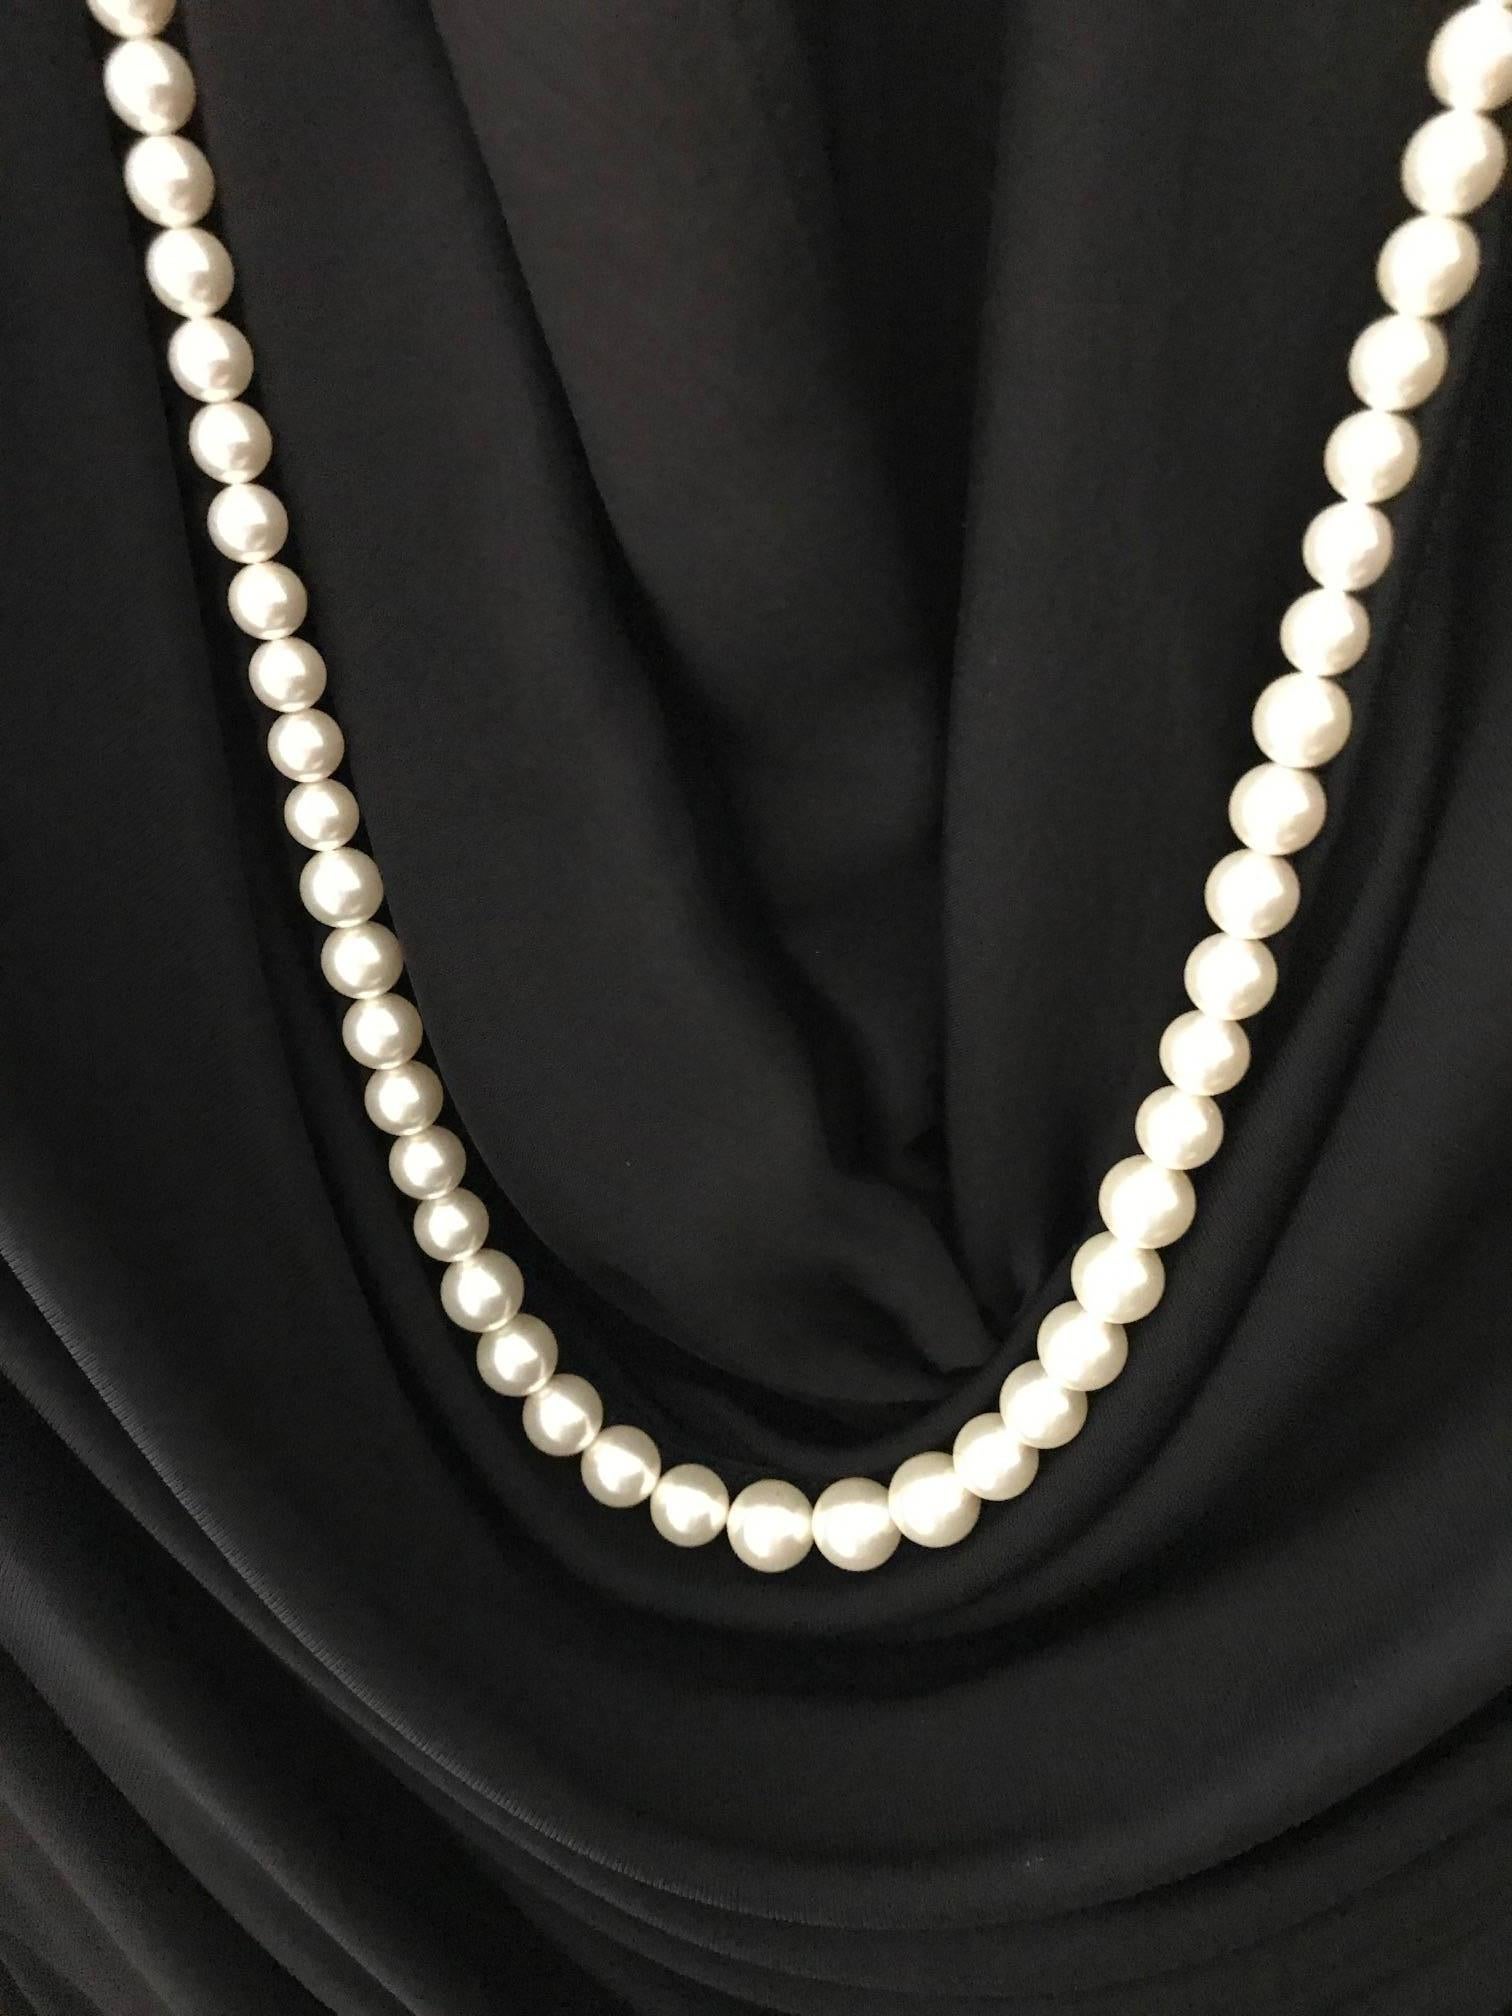 black dress with pearls